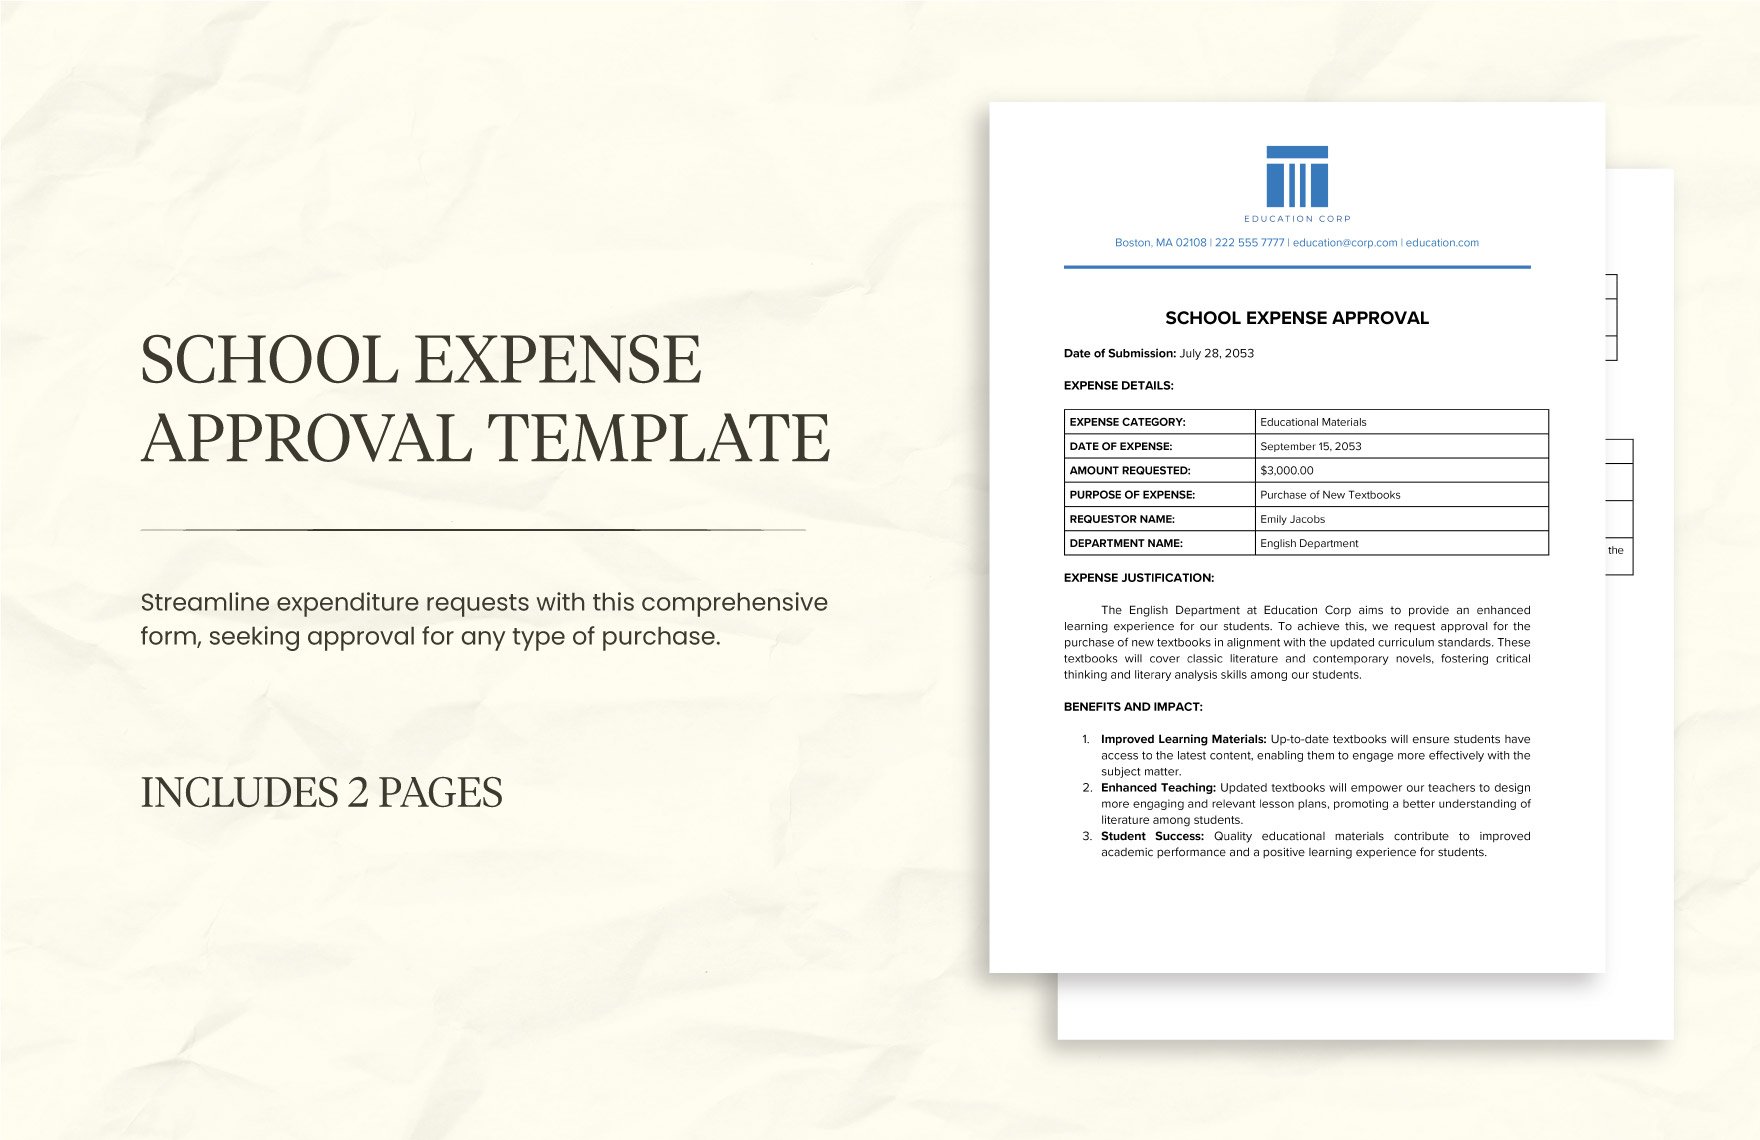 School Expense Approval Template in Word, Google Docs, PDF